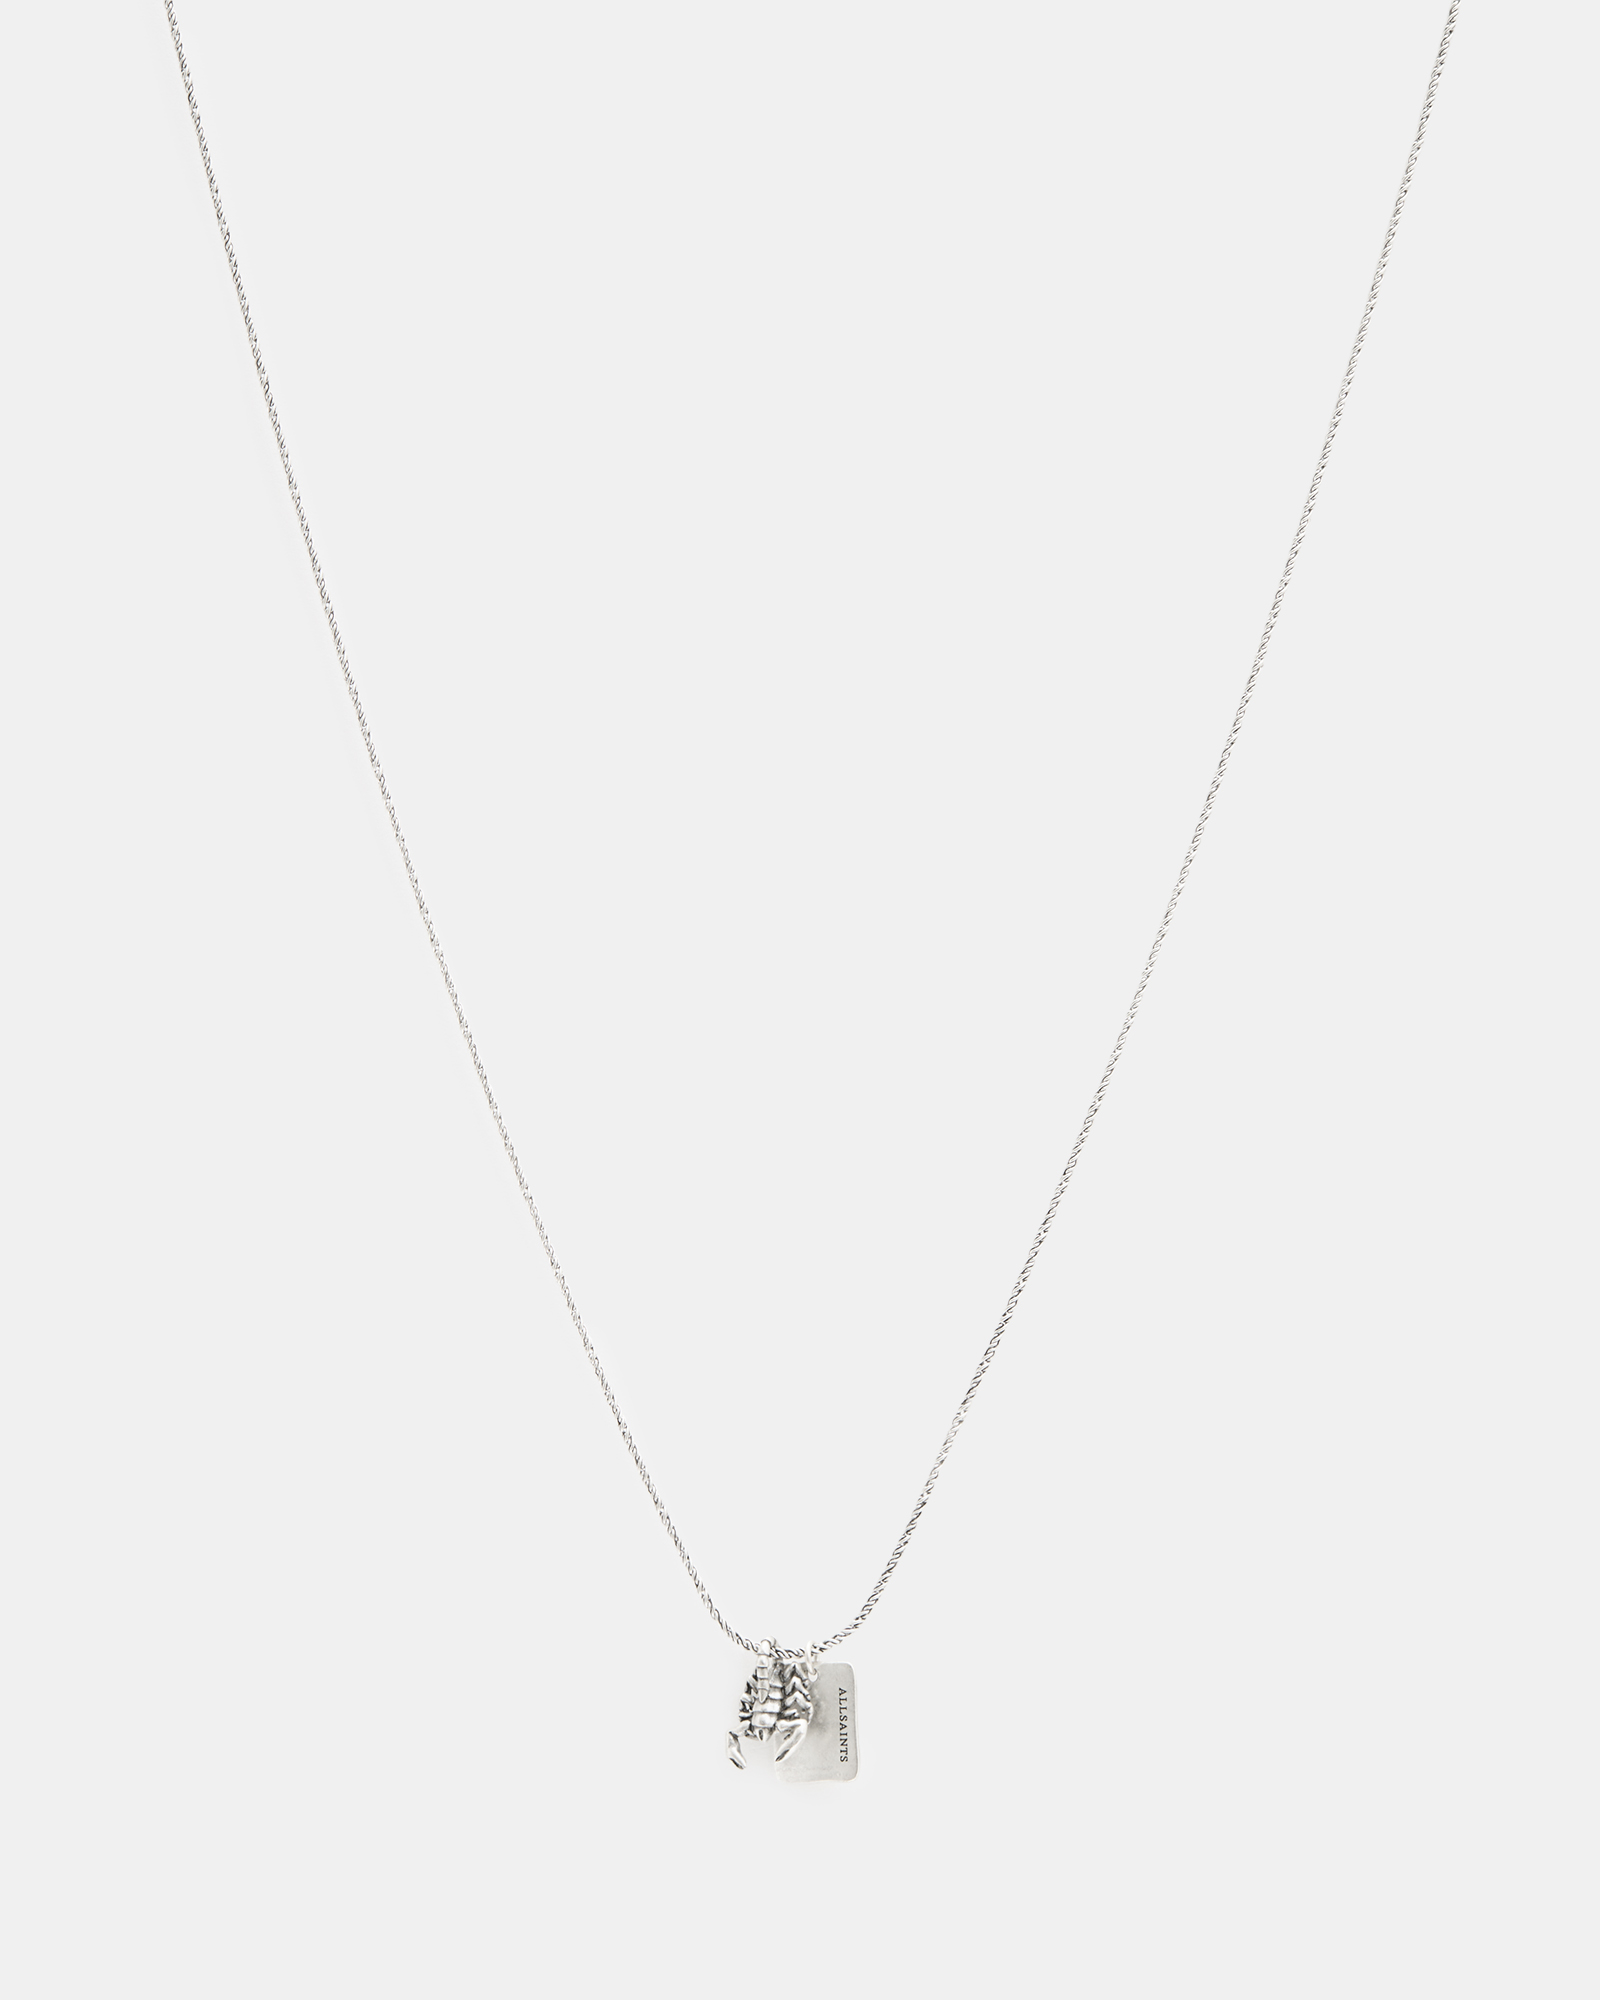 AllSaints Scorpius Tag Sterling Silver Necklace,, WARM SILVER